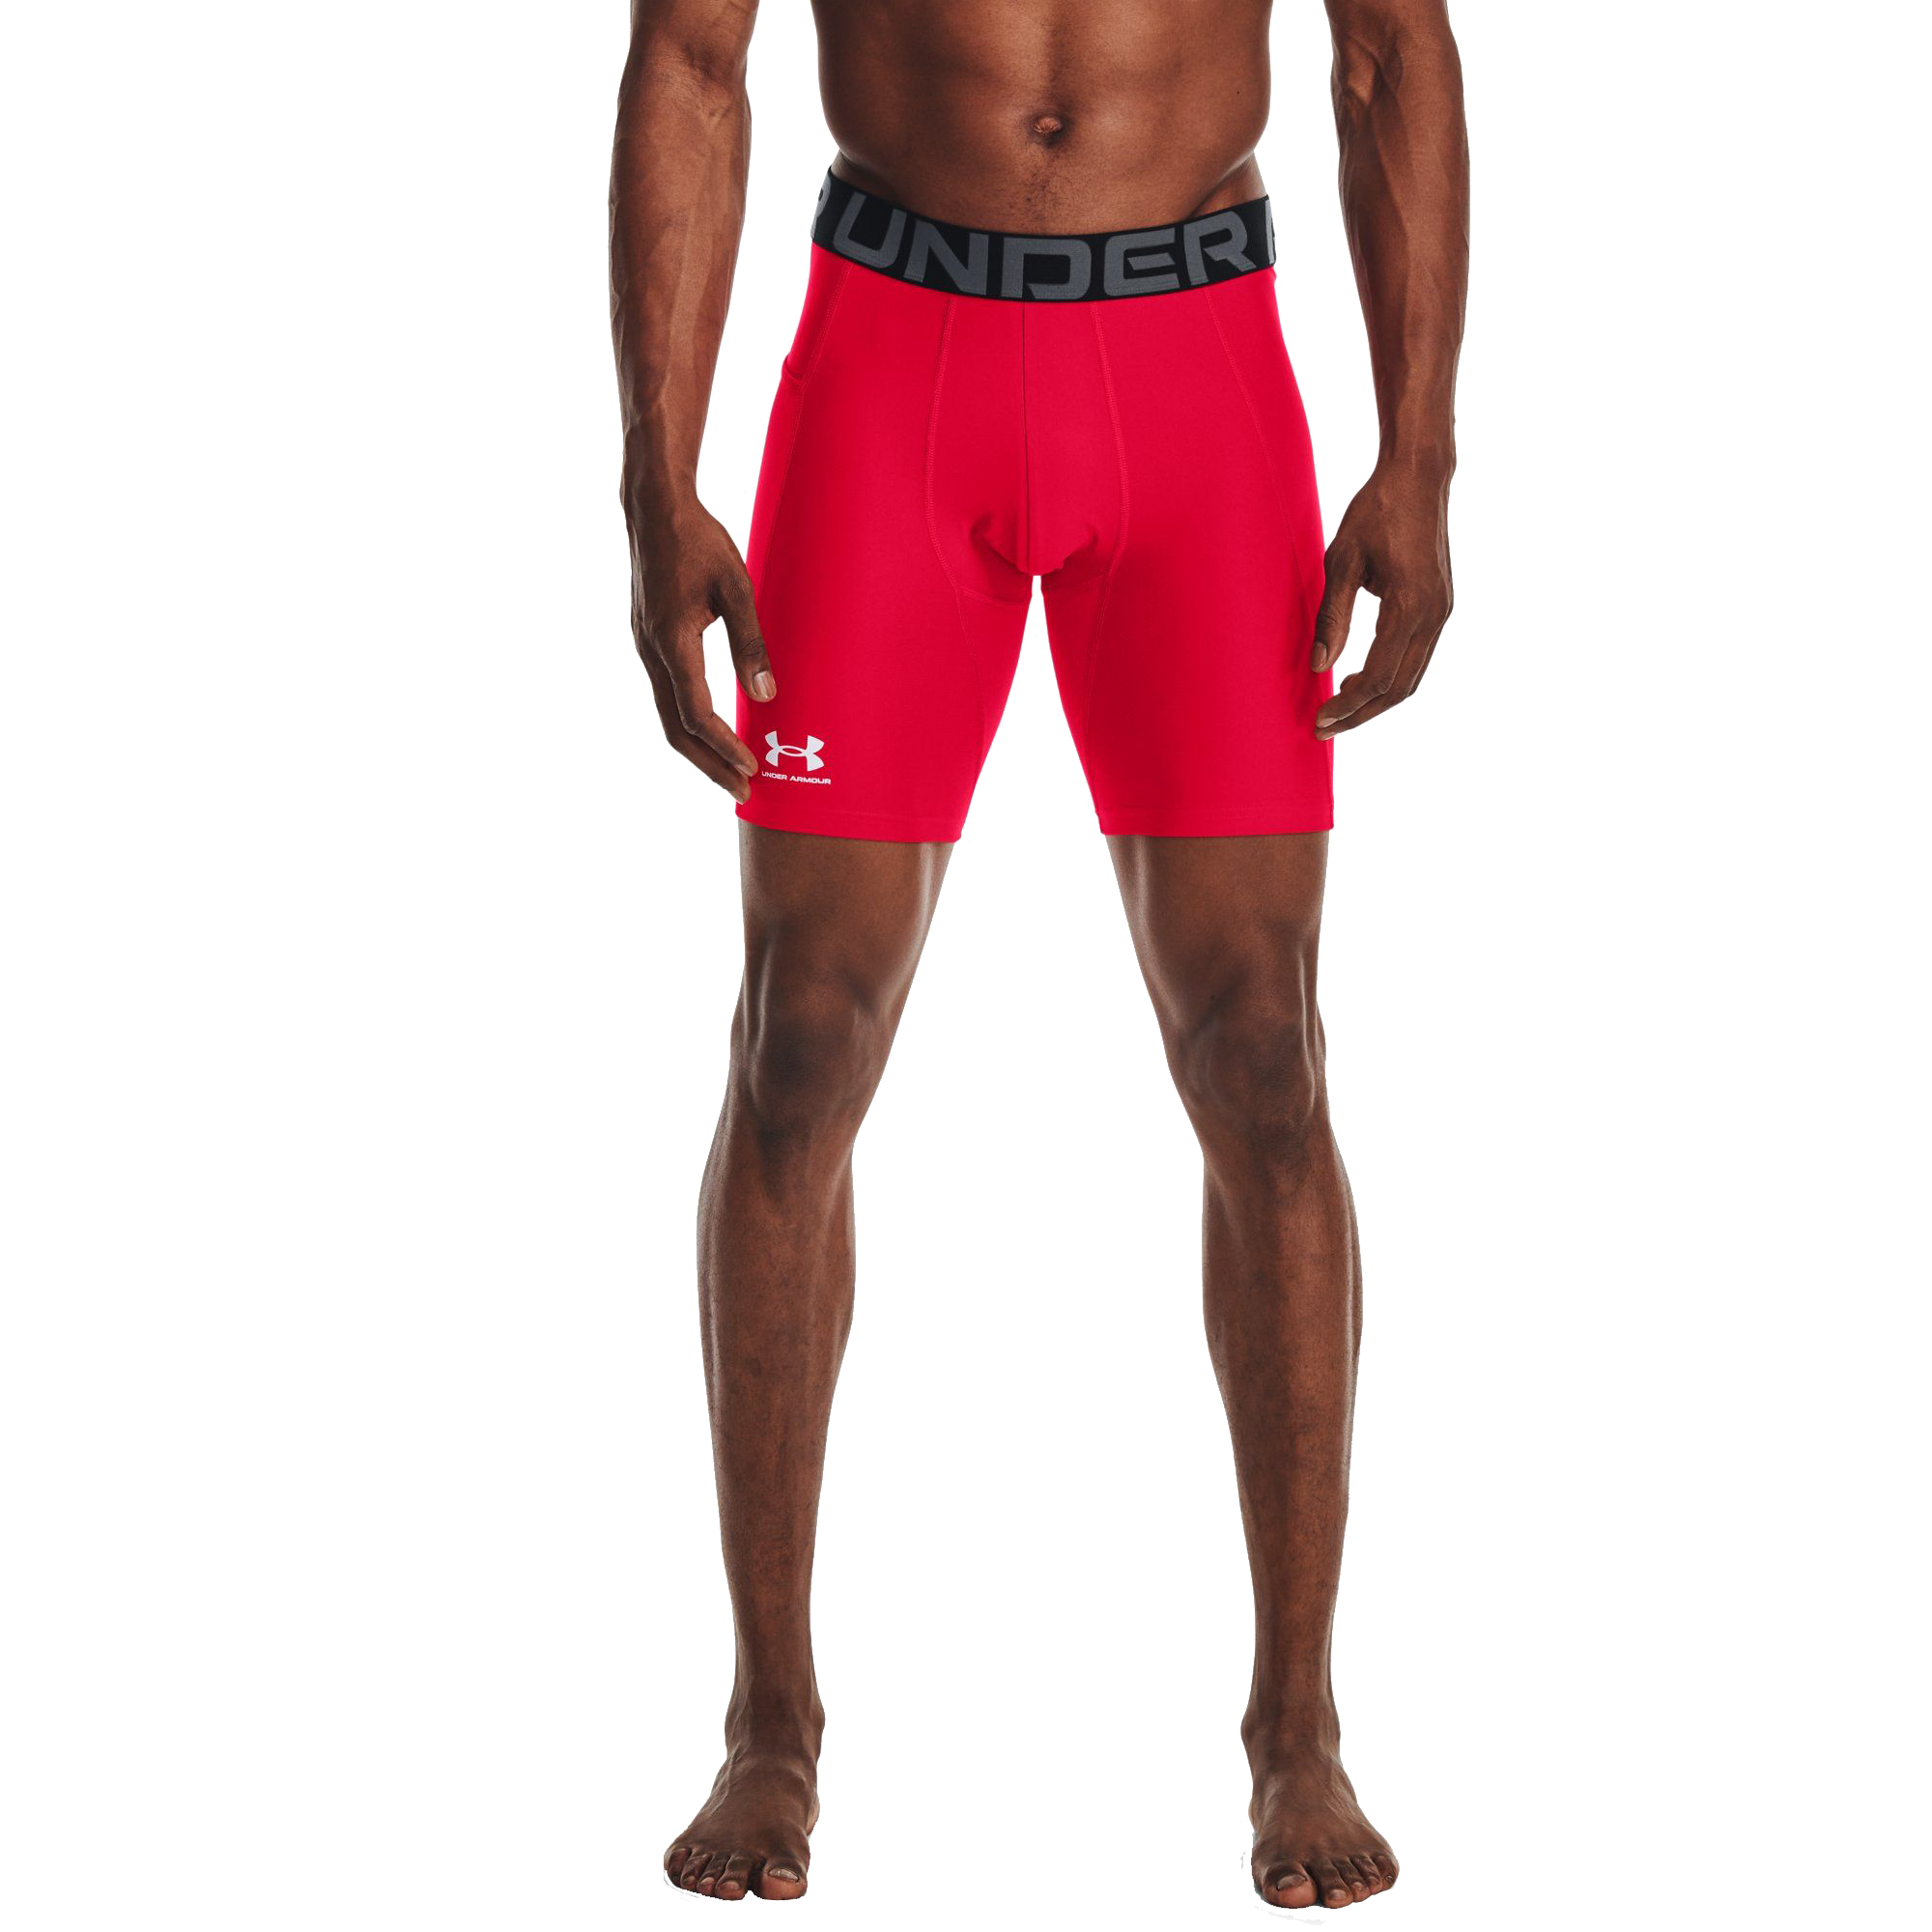 Under Armour HeatGear Armour Compression Shorts for Men - Red/White - 4XL